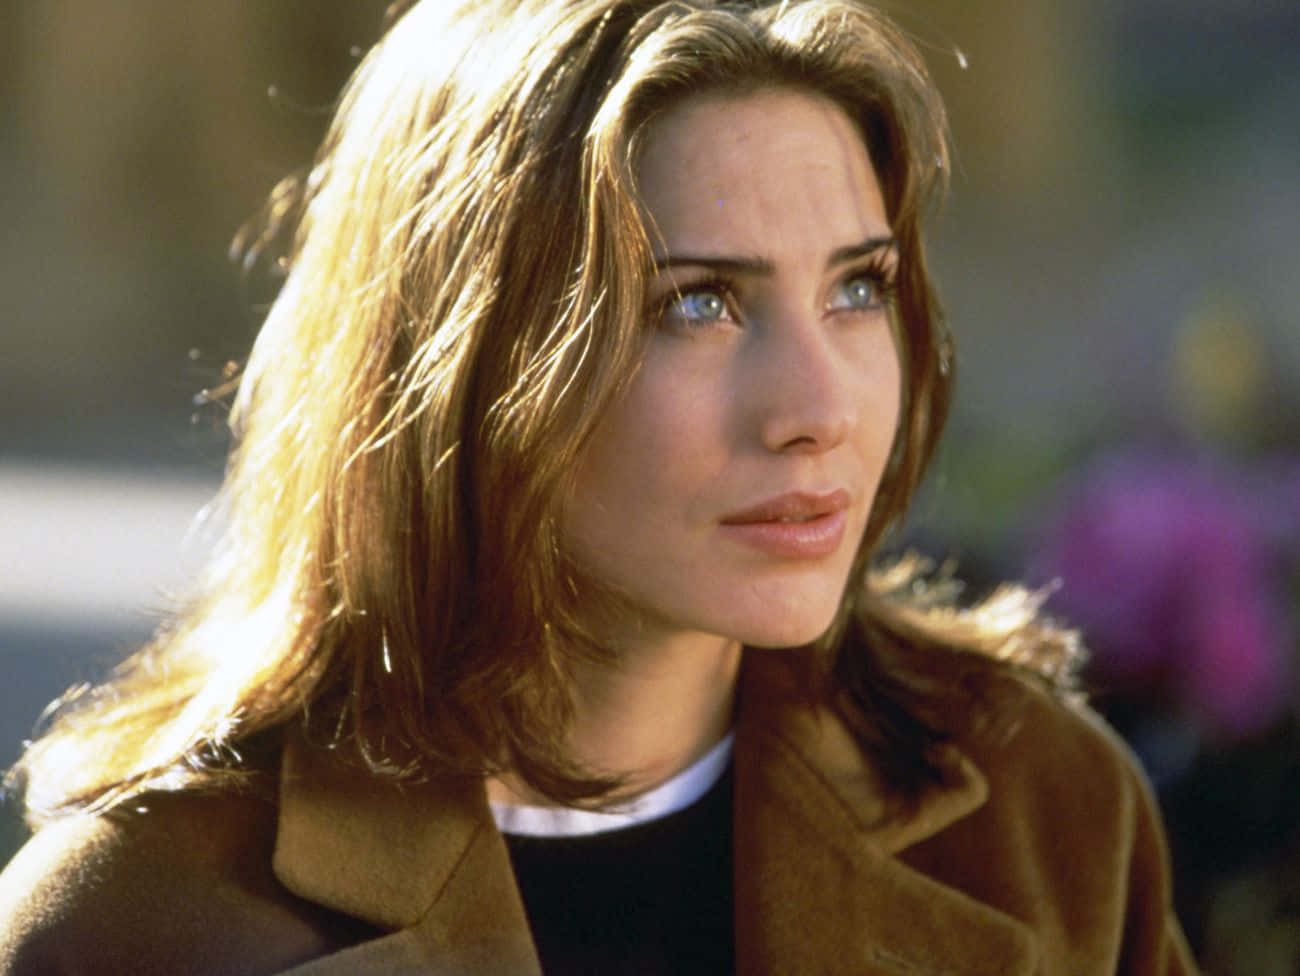 Iconic Cool - Claire Forlani.